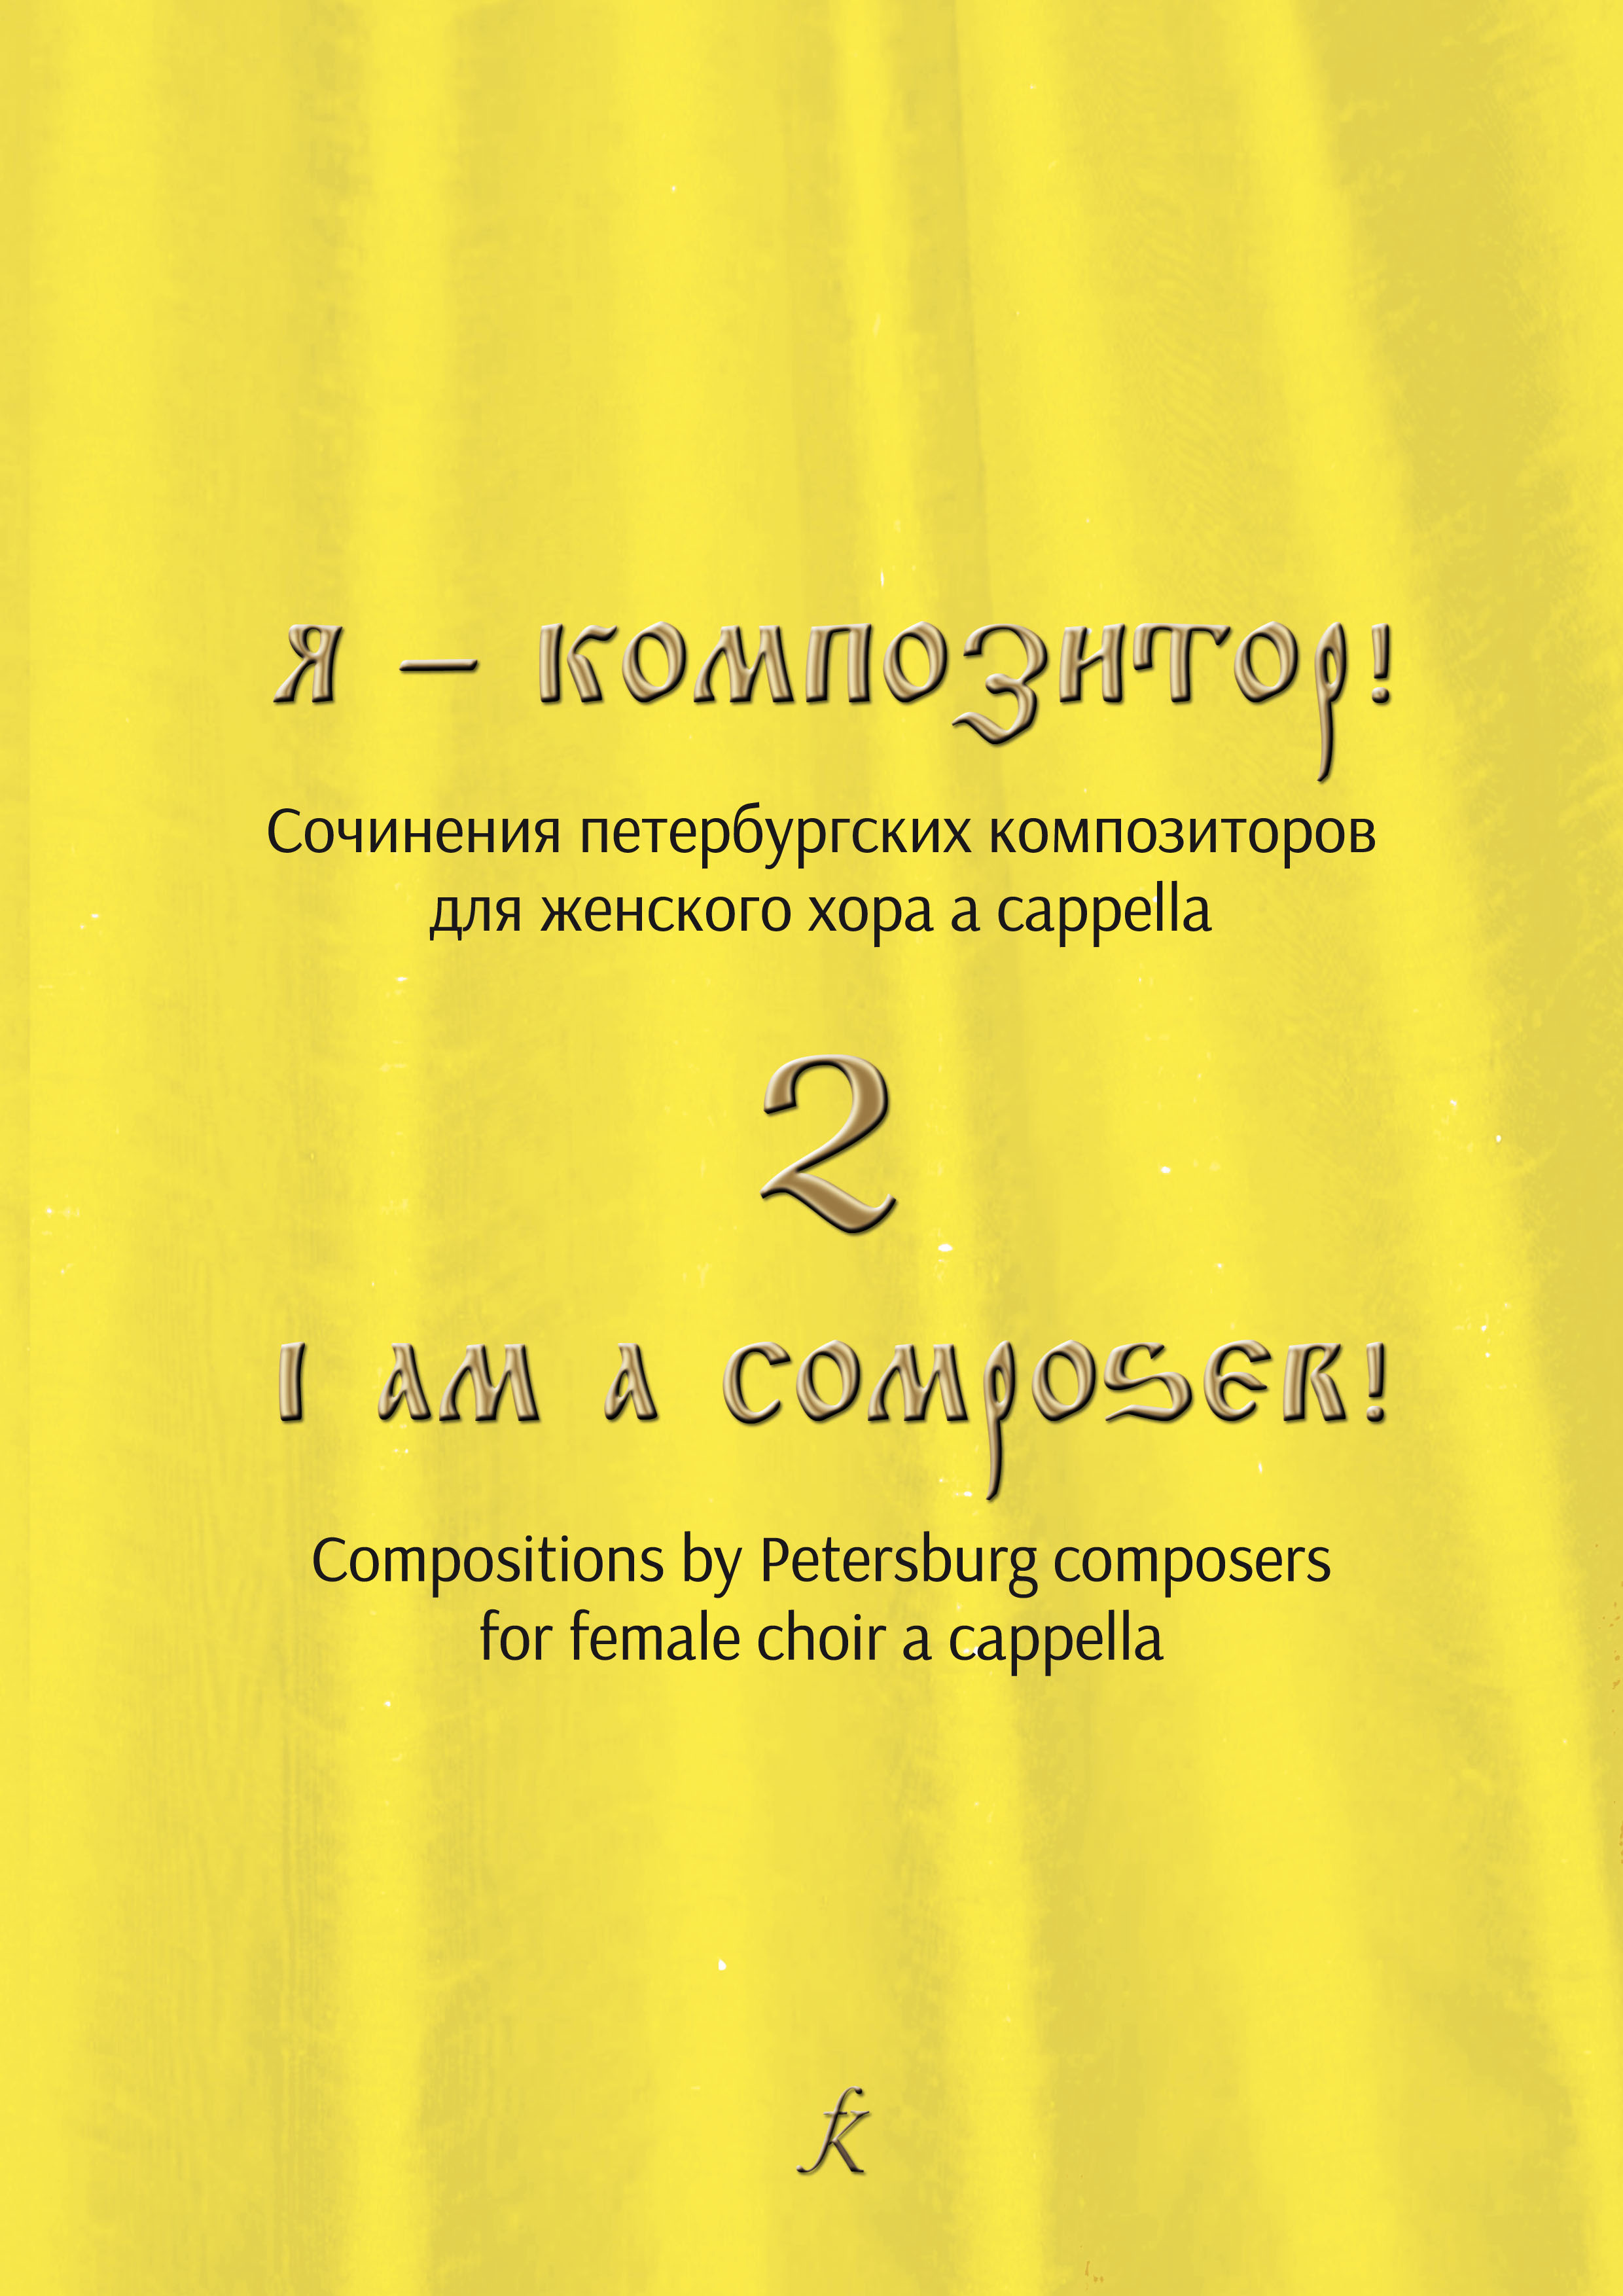 Yekimov S. I am a Composer! Pieces by Petersburg composers for female choir a cappella. Vol. 2